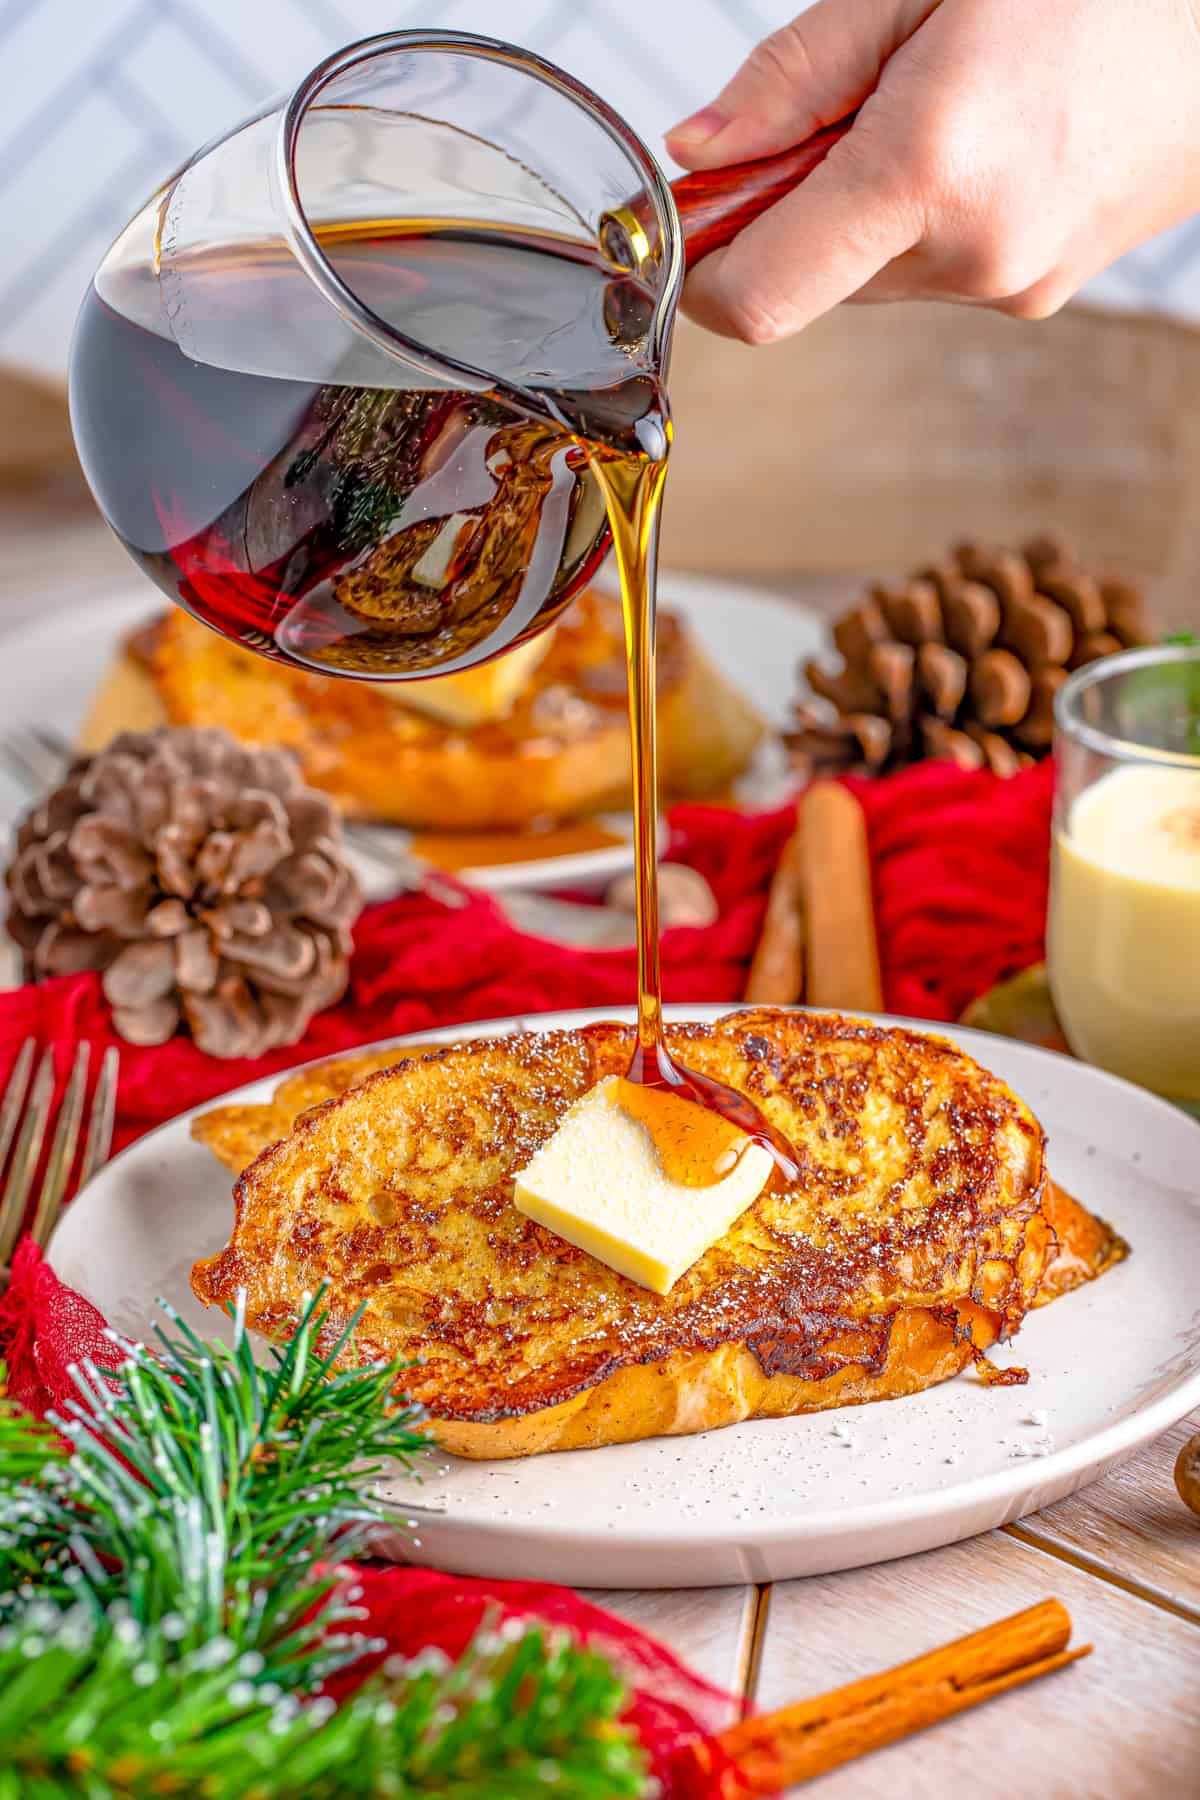 Styrup being poured over French Toast on plate with pat of butter.